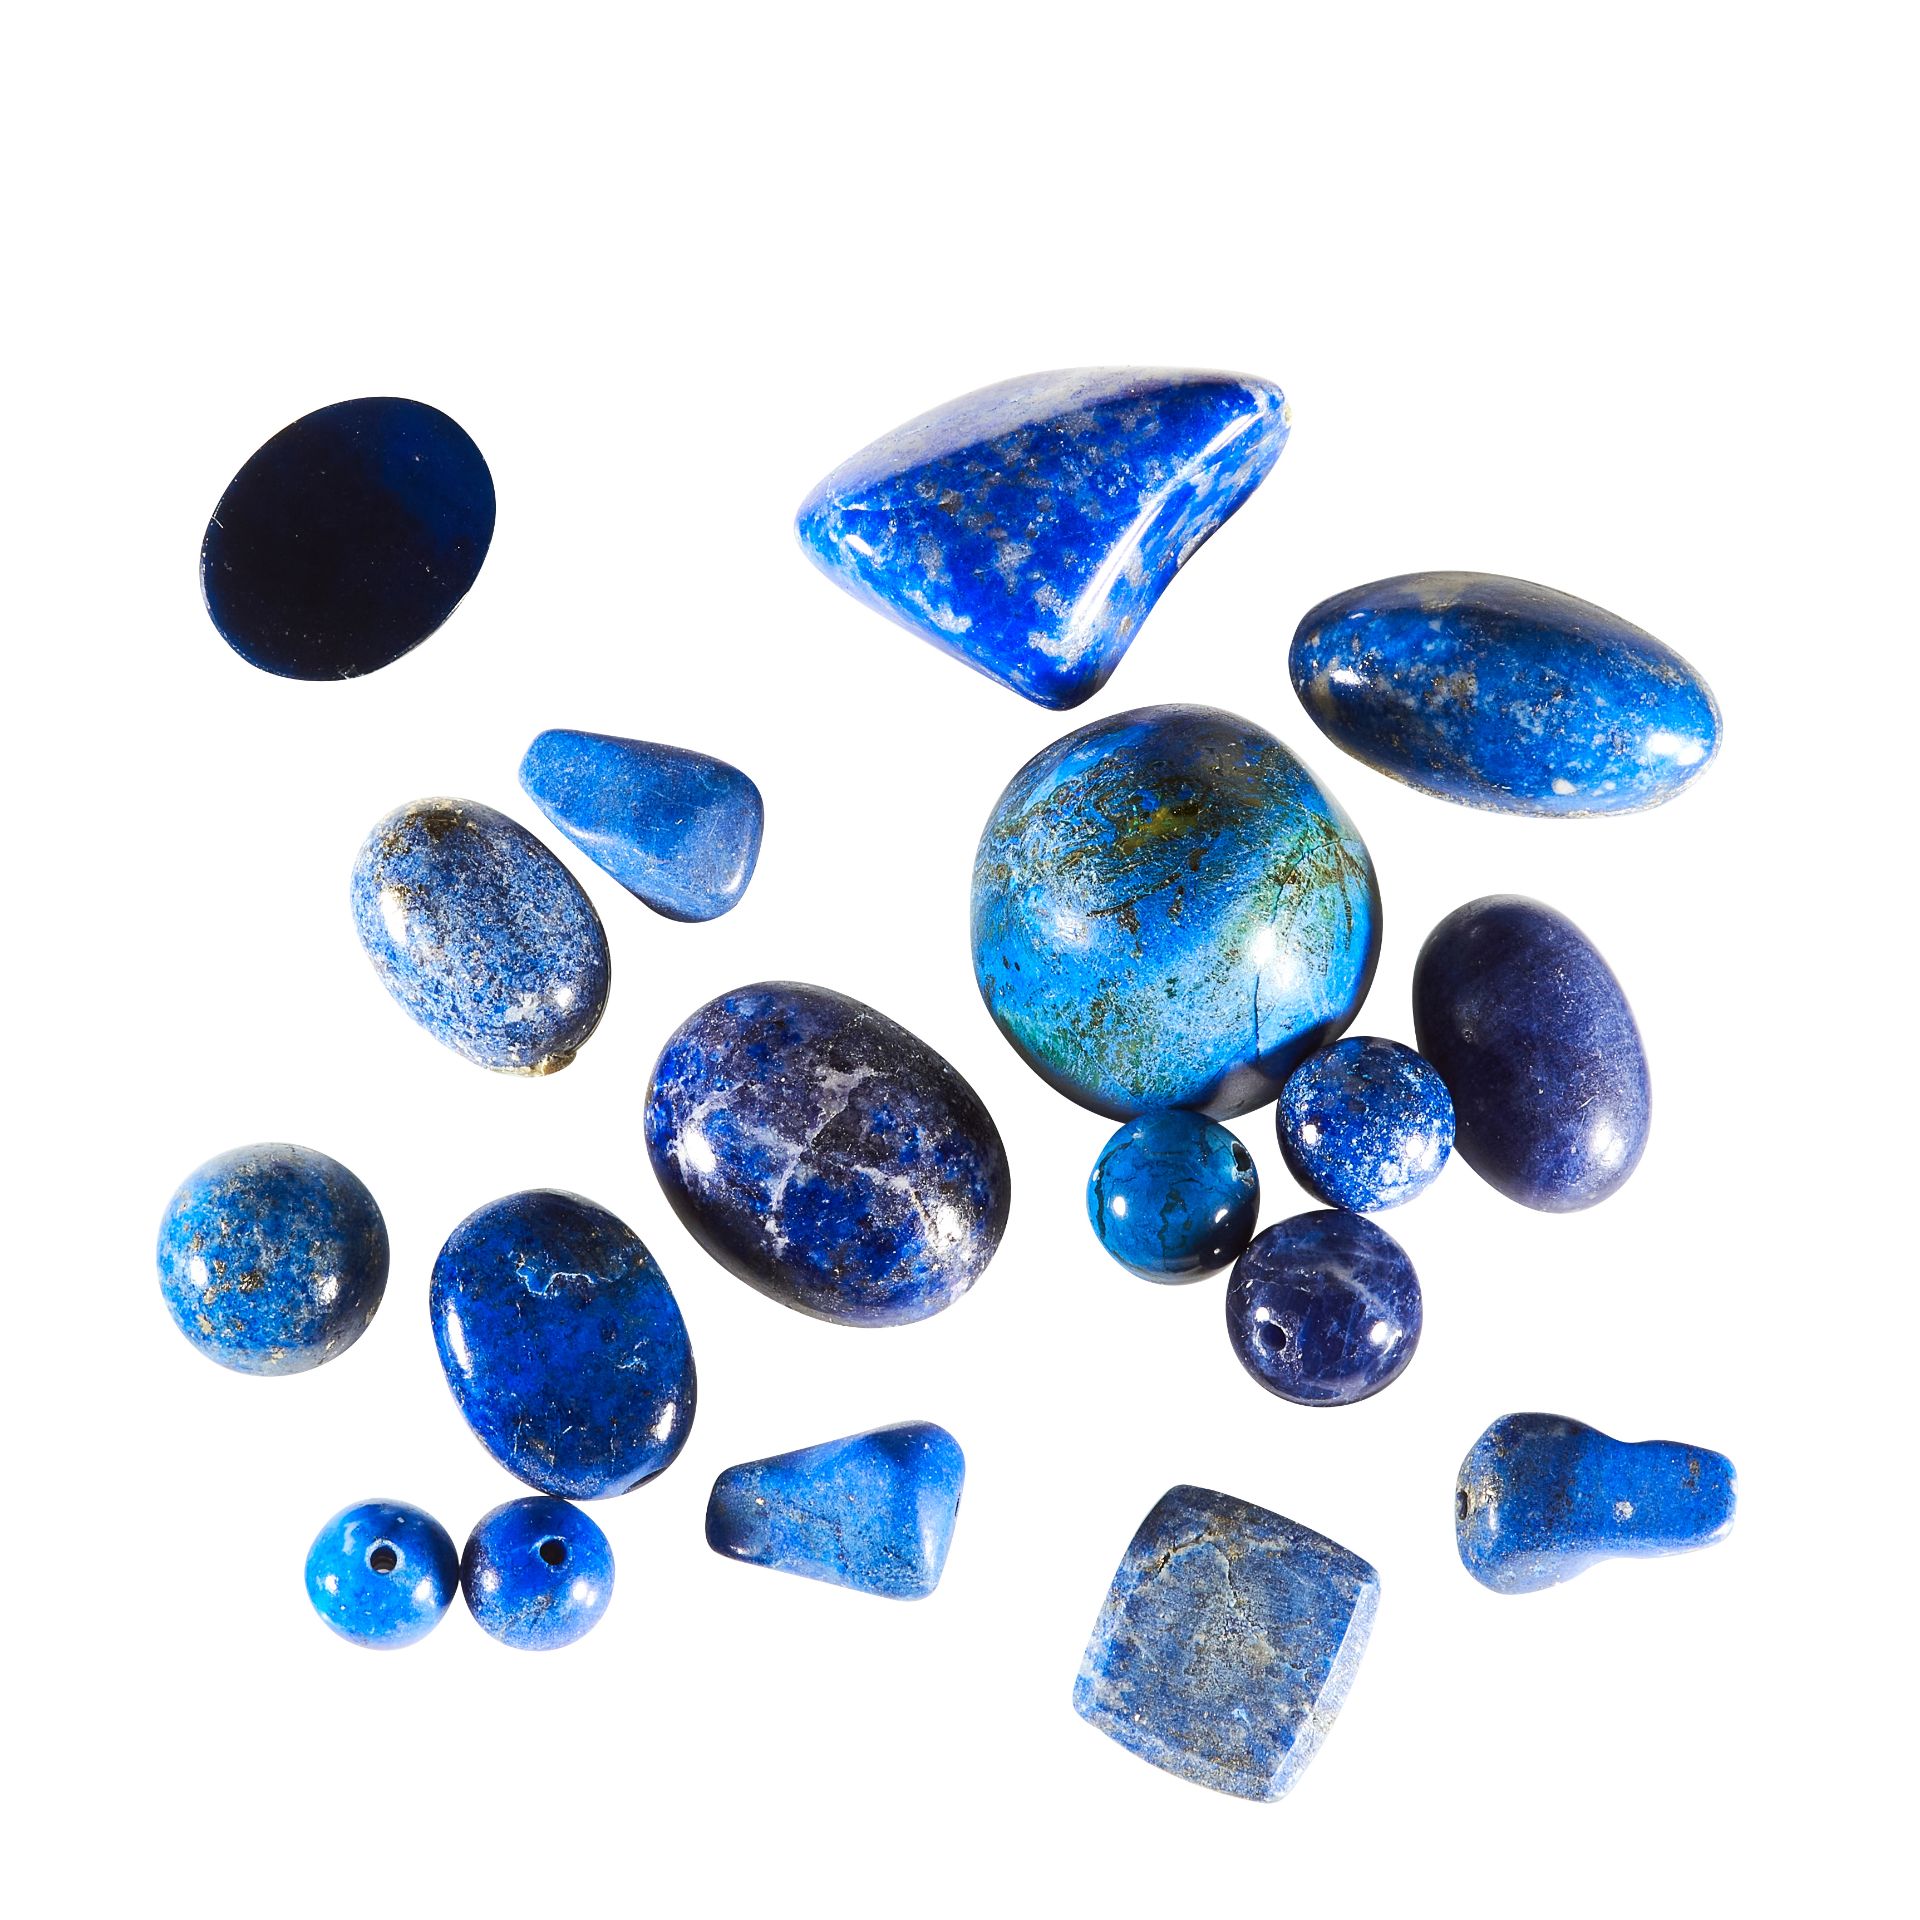 A MIXED LOT OF UNMOUNTED LAPIS LAZULI of various shapes and cuts, 140.7g.